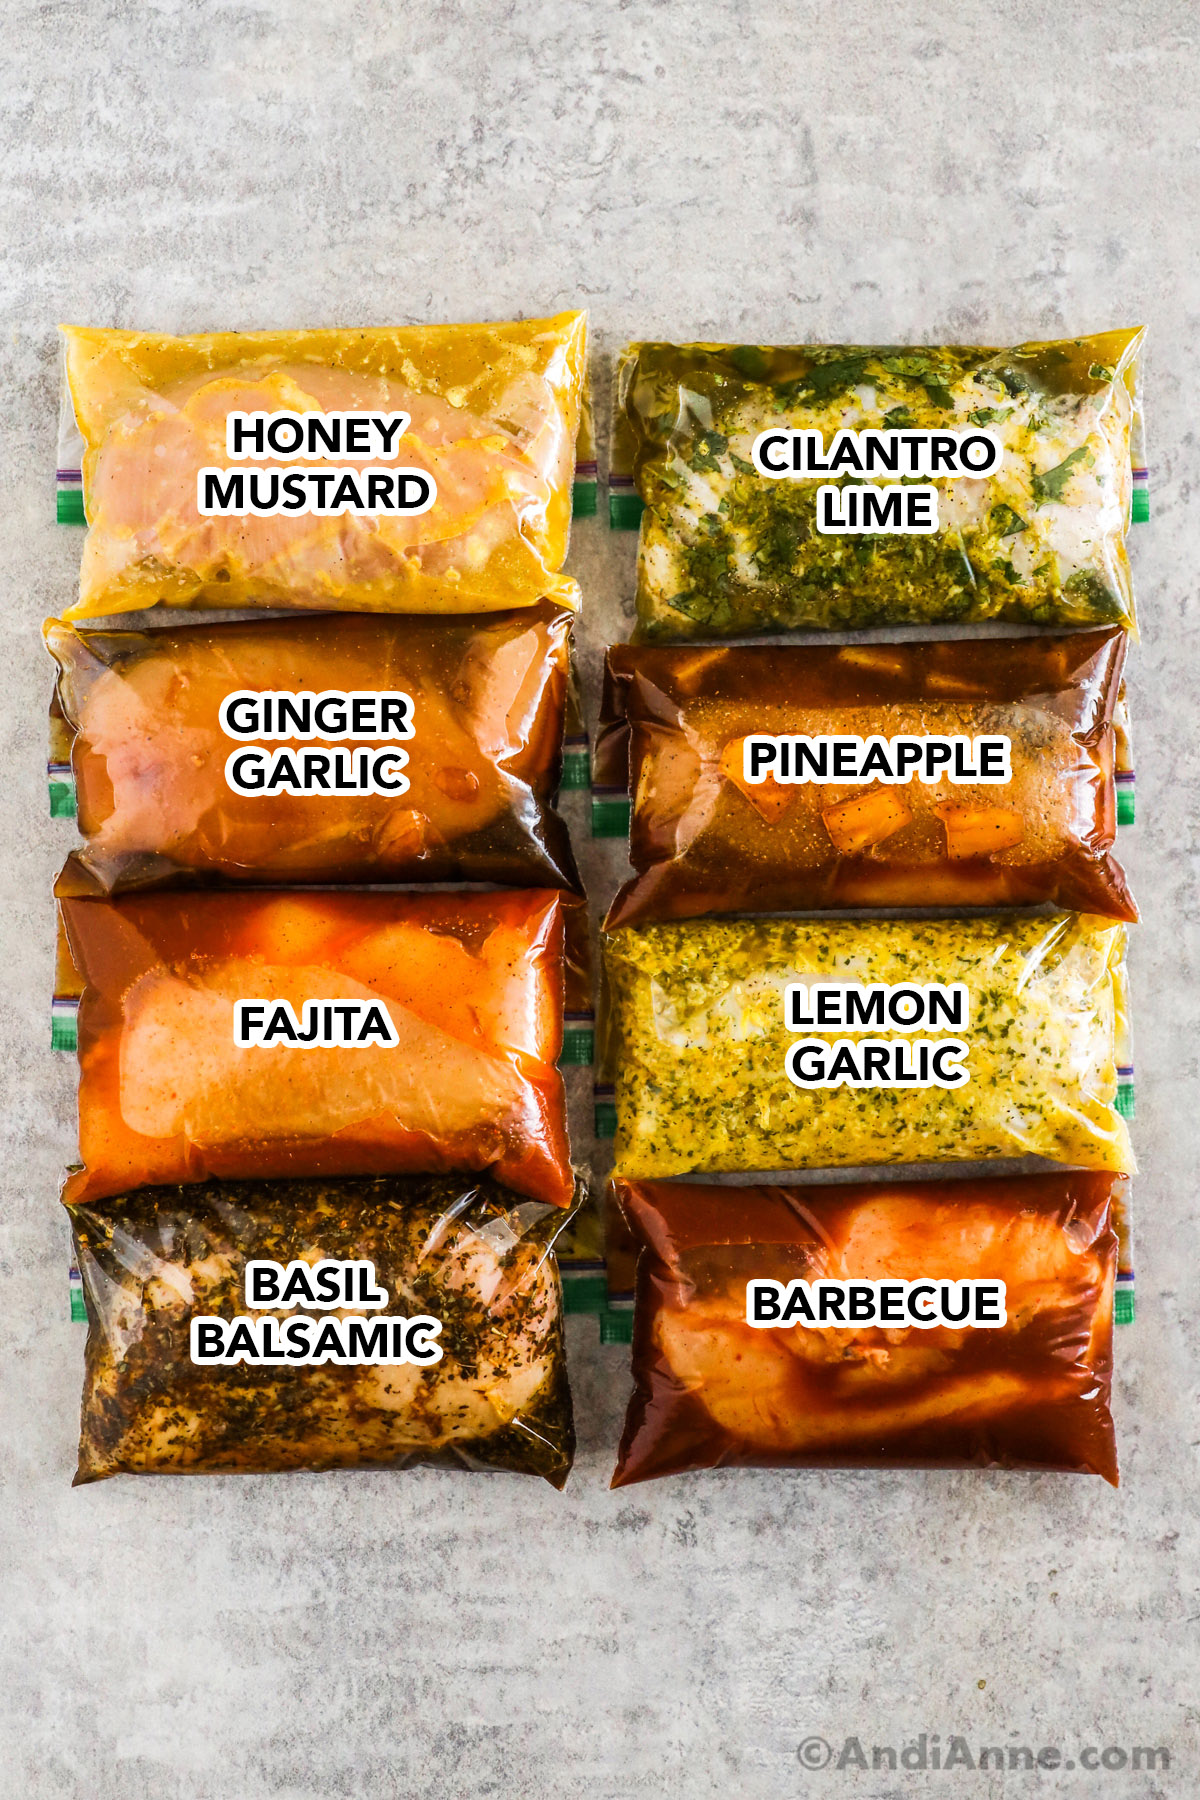 8 different chicken marinades with a raw chicken breast in each. All wrapped in plastic ziploc bags and stacked together.